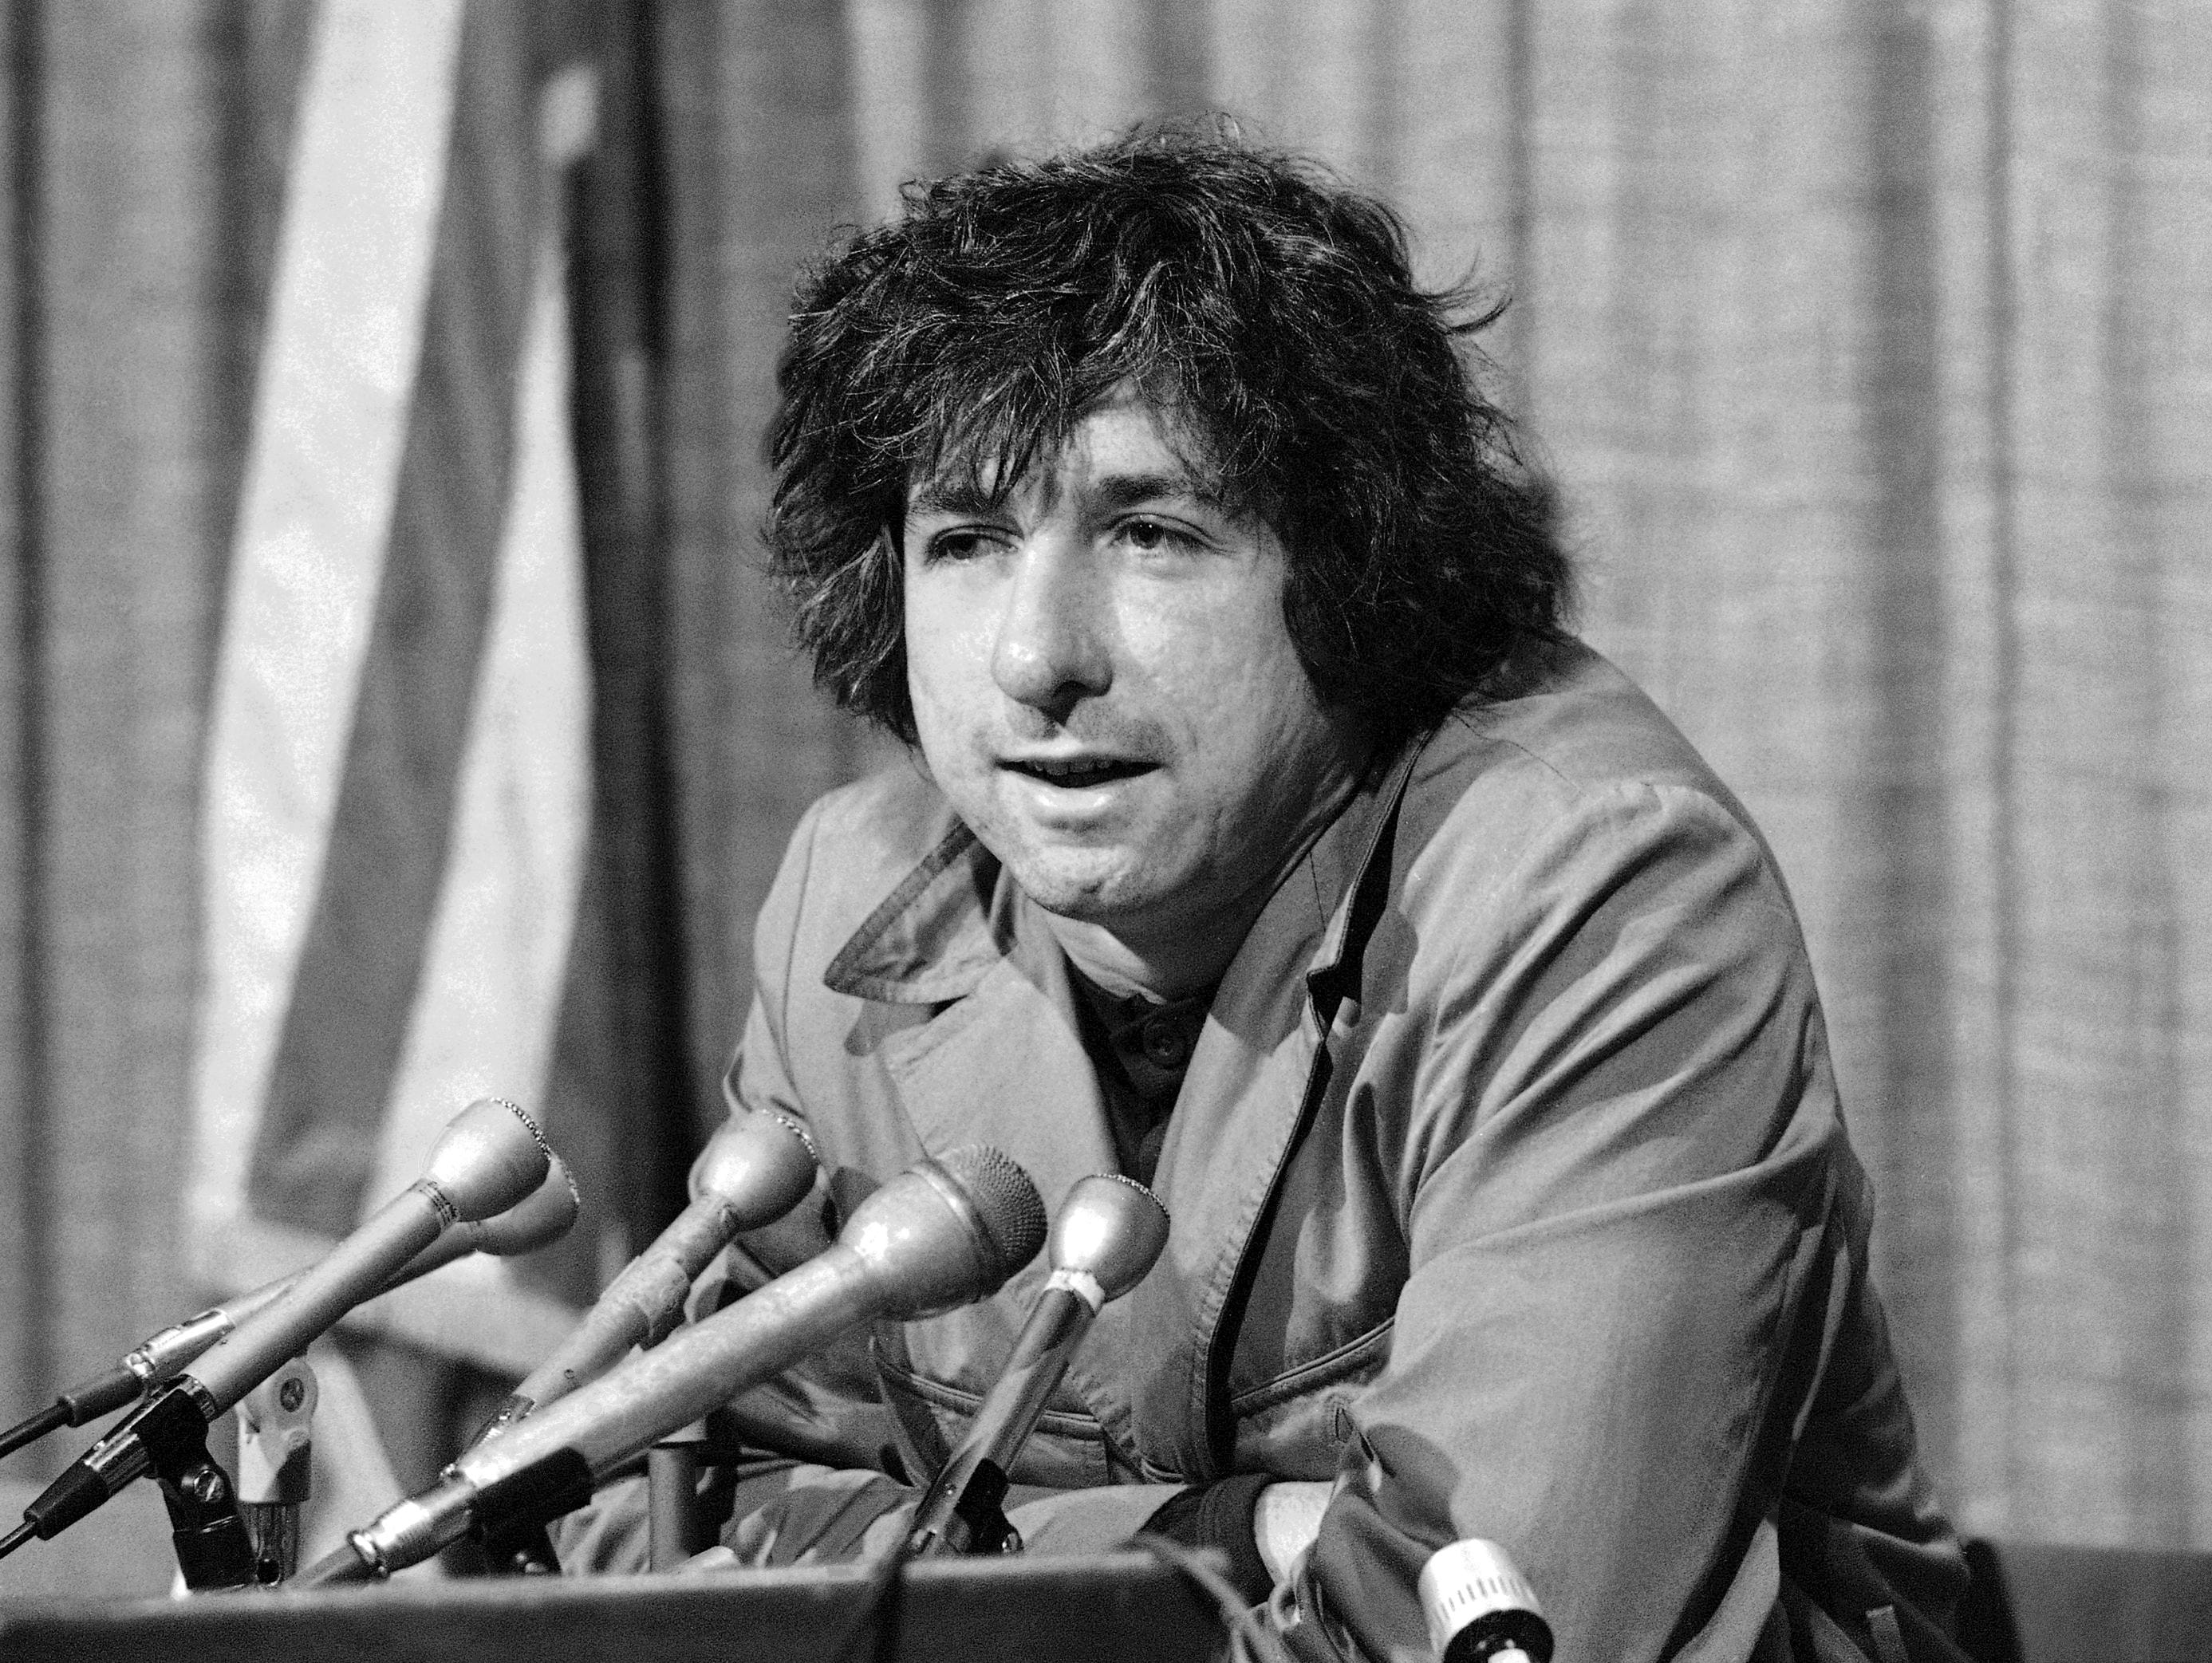 In this Dec. 6, 1973 file photo, political activist Tom Hayden tells newsmen in Los Angeles that he believes public support was partially responsible for the decision not to send him and others of the Chicago 7 to jail for contempt. Hayden, the famed